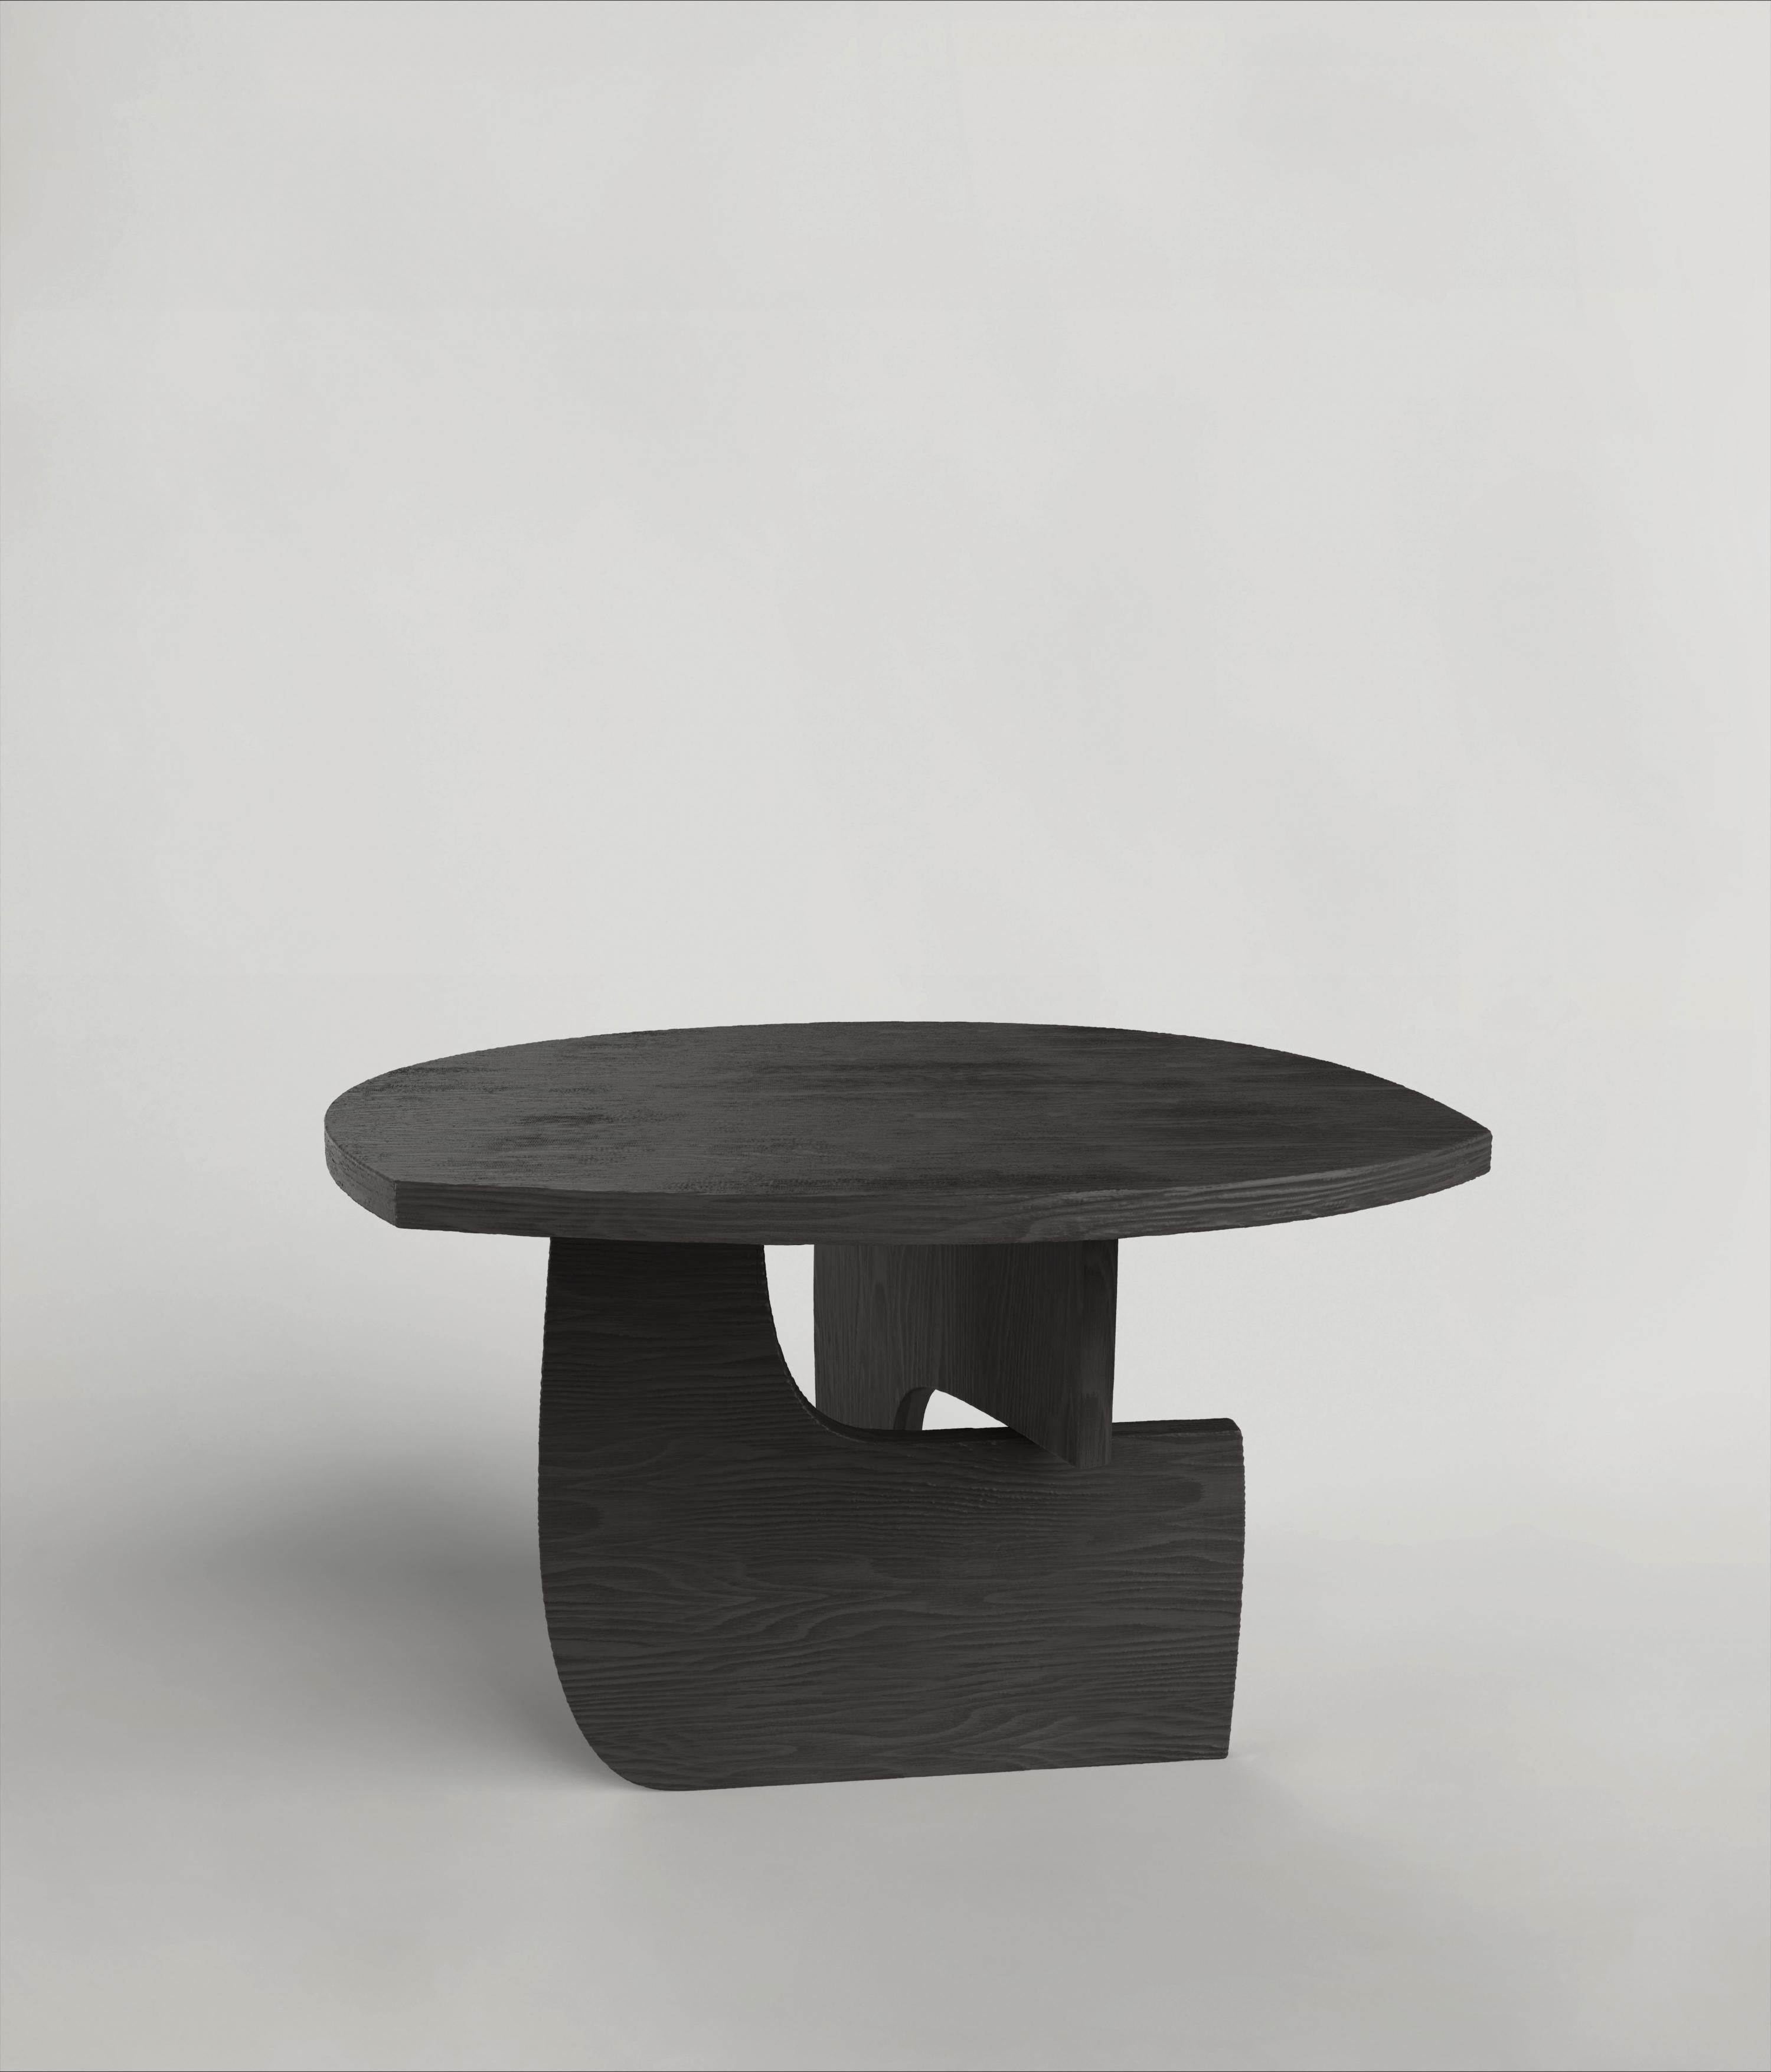 This 21st Century Black table is a product of Italian craftmanship, starting entirely from all-hardwood, the craftsmen sculpt Reef V2 and then char the wood using the Shou Sugi Ban technique. The piece is manufactured in a limited edition of 150